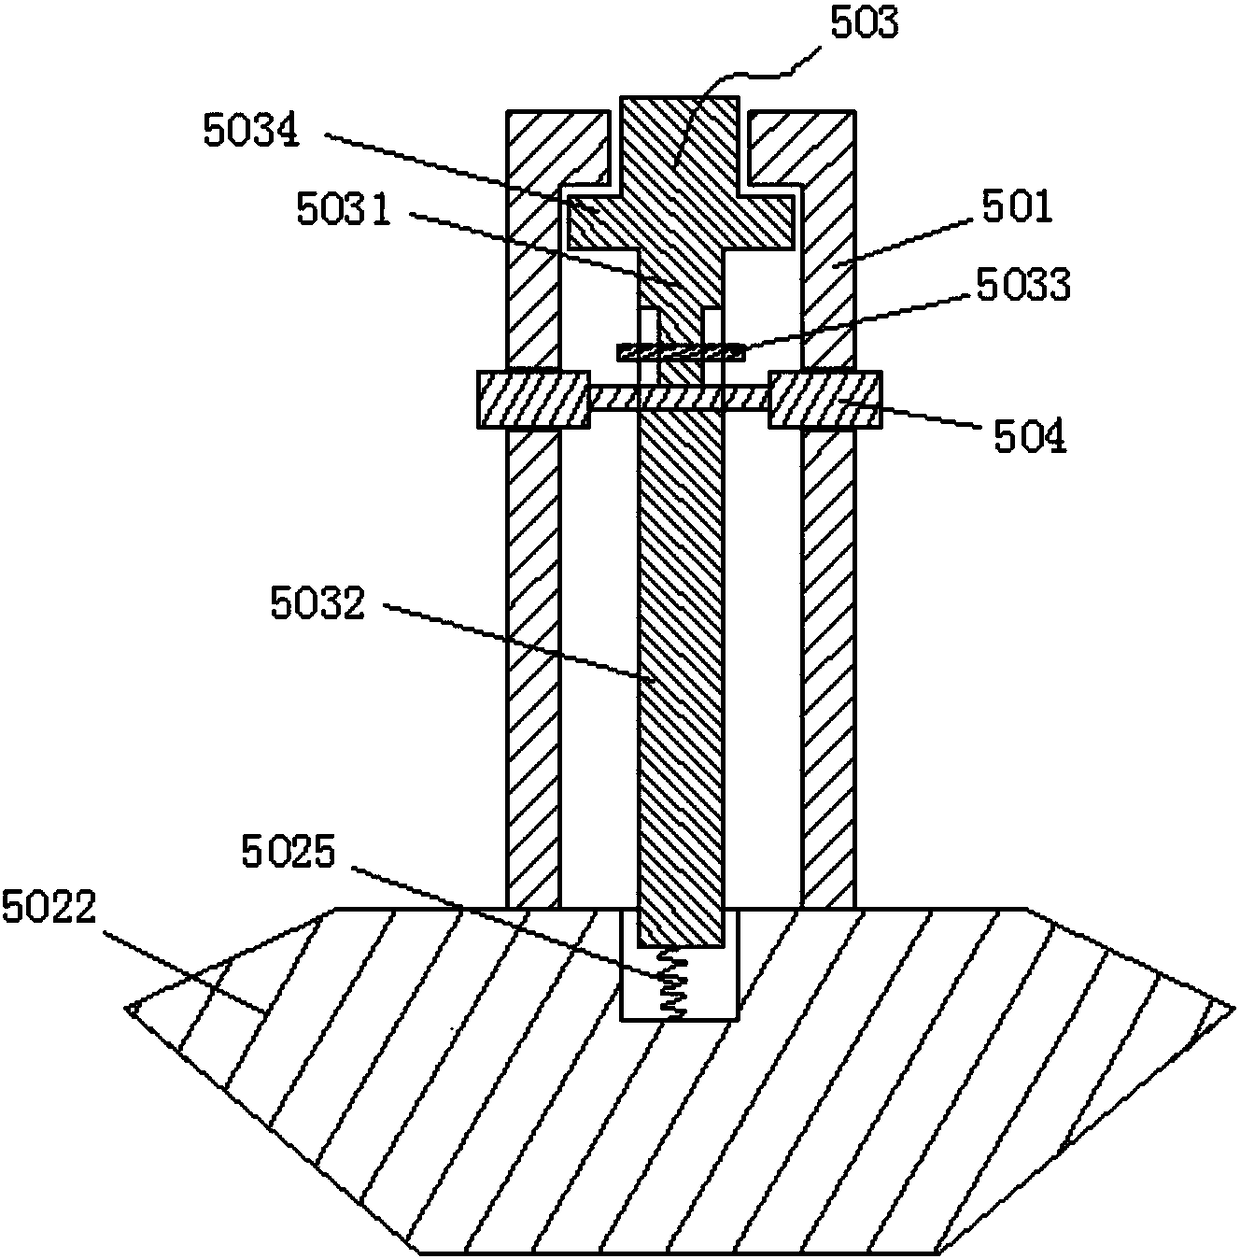 Rotating platform fixture for inertial product detection